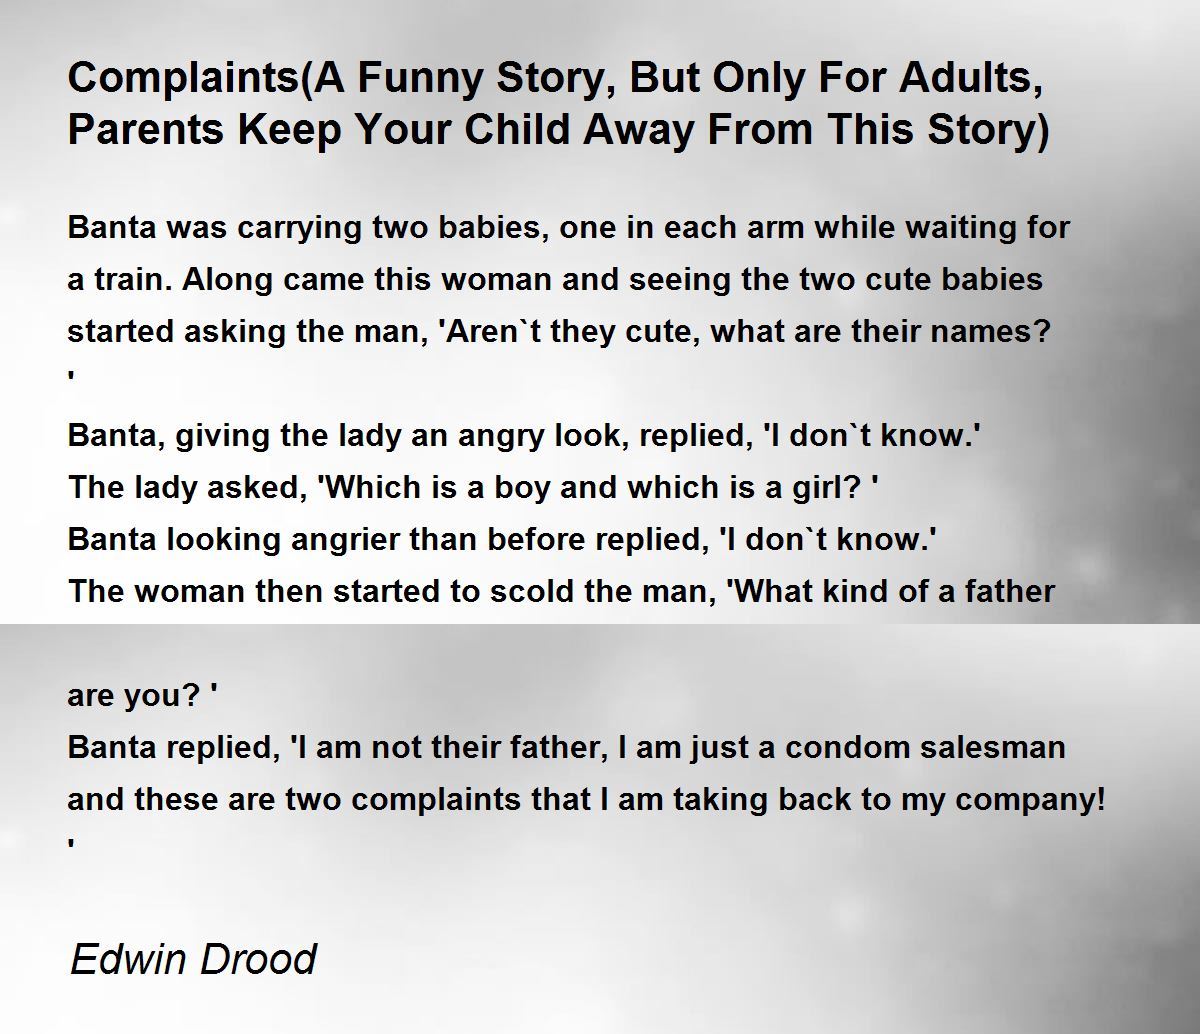 Complaints(A Funny Story, But Only For Adults, Parents Keep Your Child Away  From This Story) - Complaints(A Funny Story, But Only For Adults, Parents  Keep Your Child Away From This Story) Poem